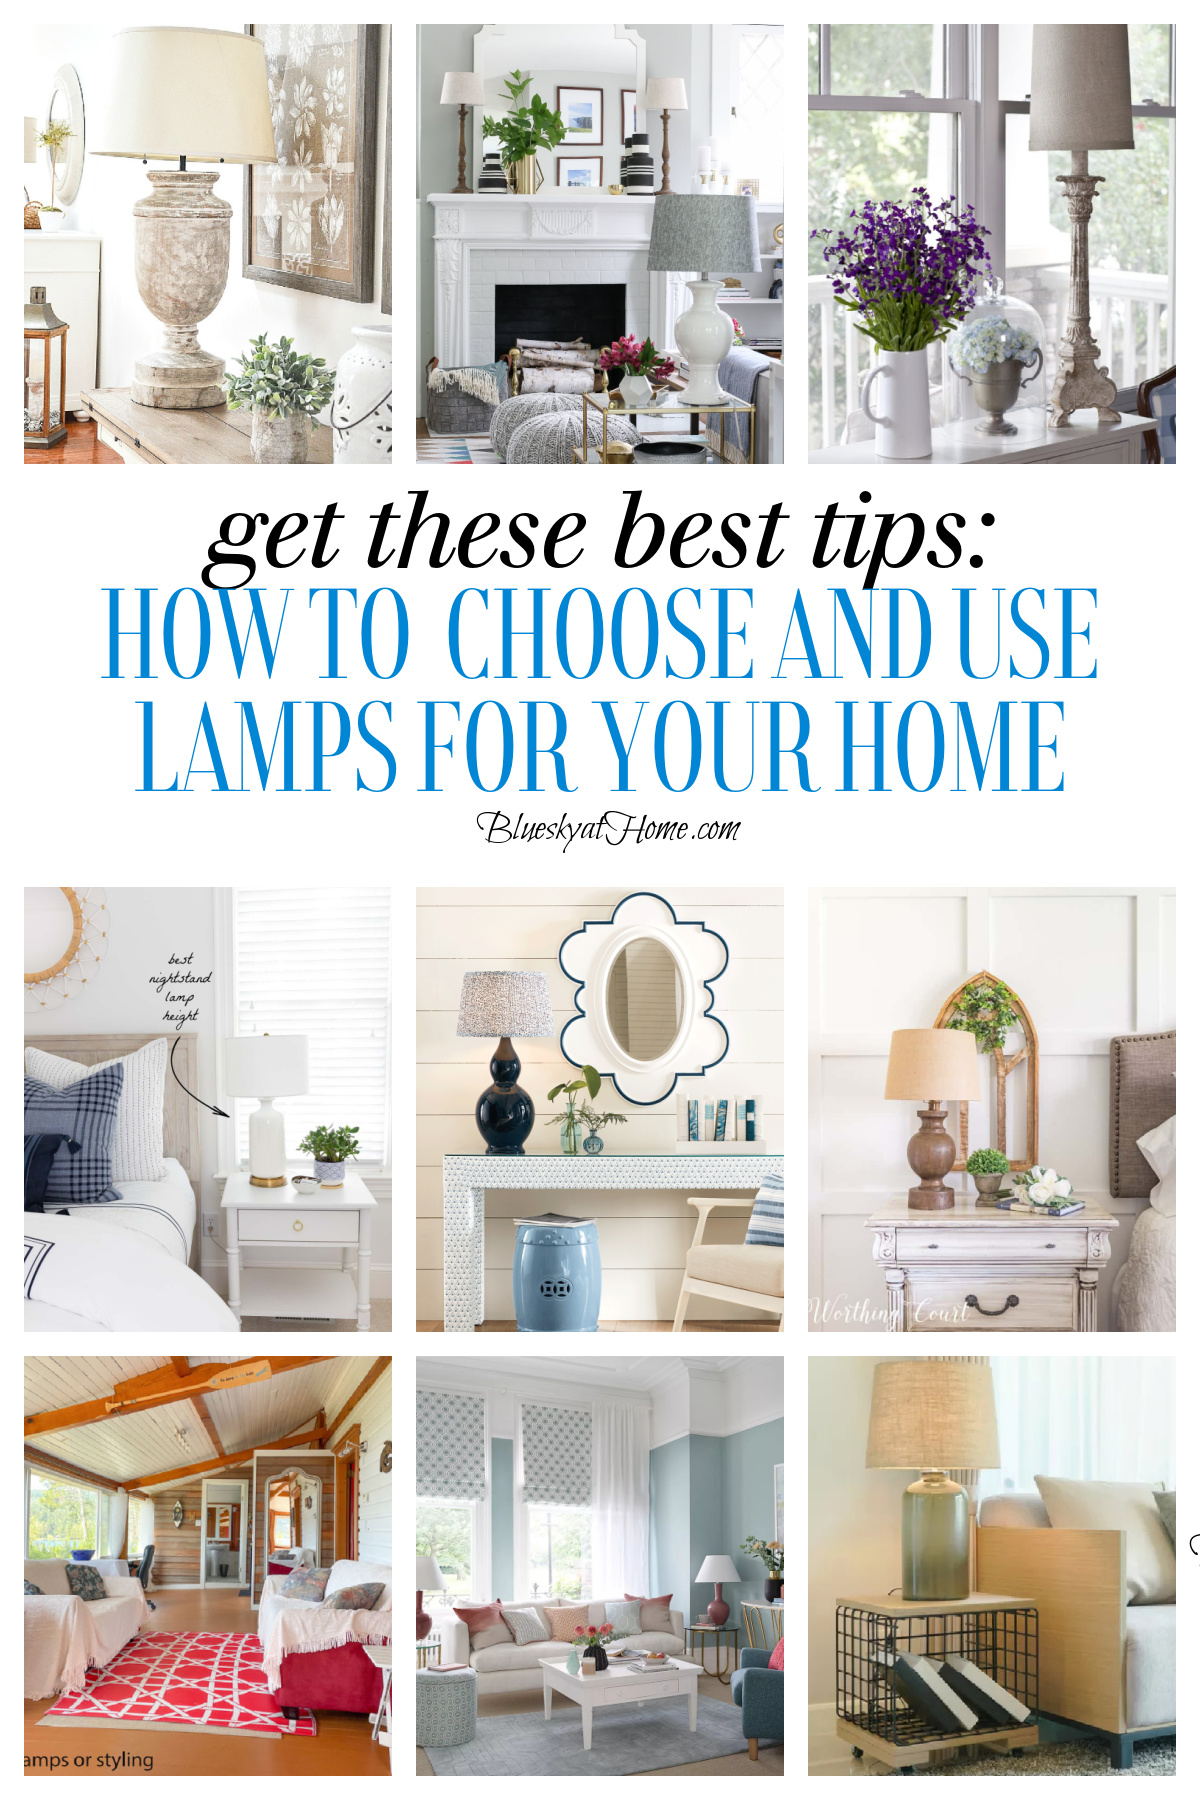 11 Best Tips to Choose and Use Lamps in your Home Decor - Bluesky at Home